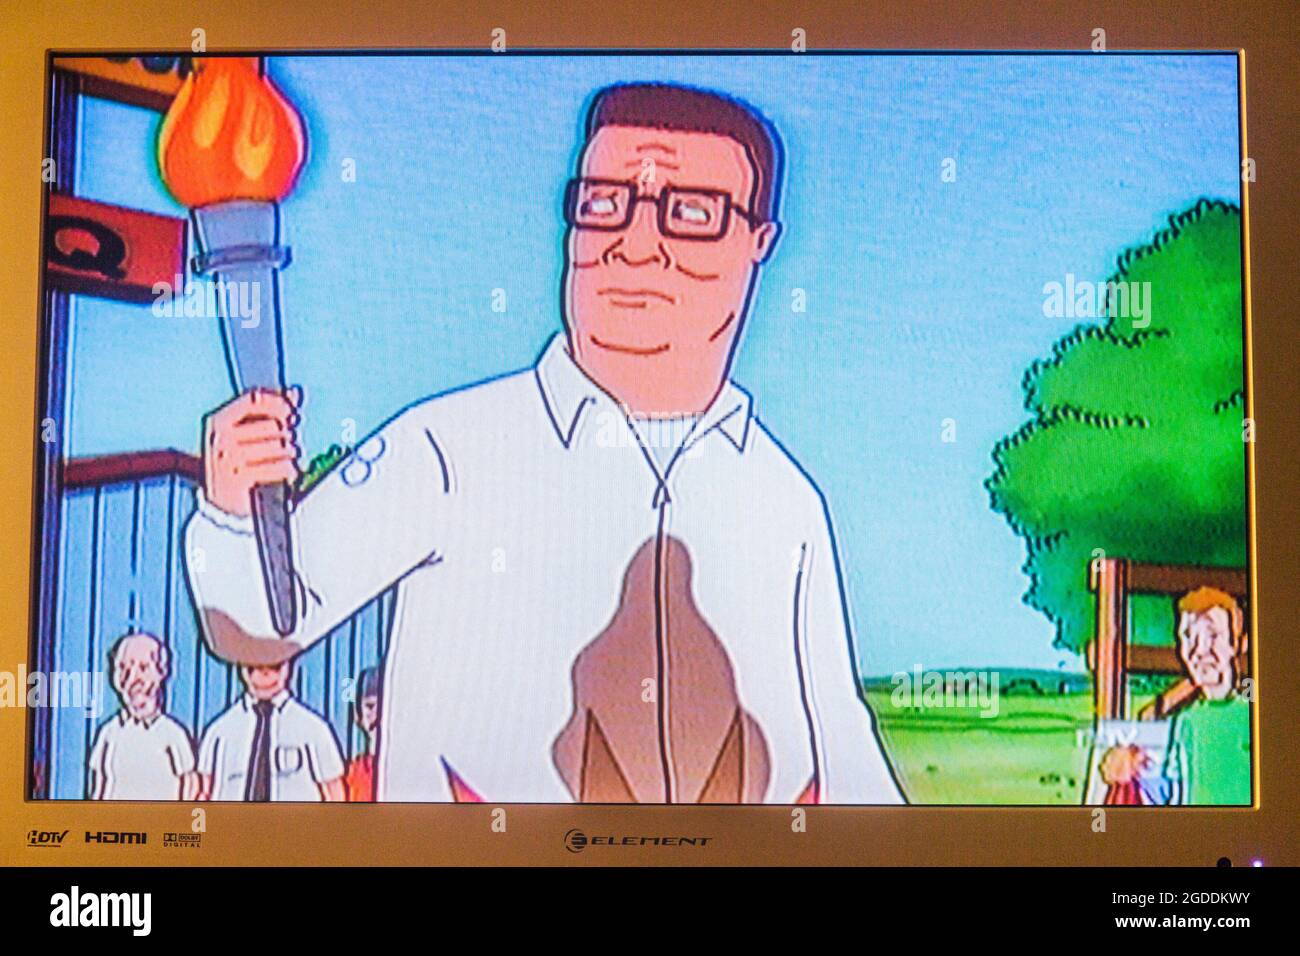 Top 20 Culture Wars Hank Hill Fought That Are Still Hilariously